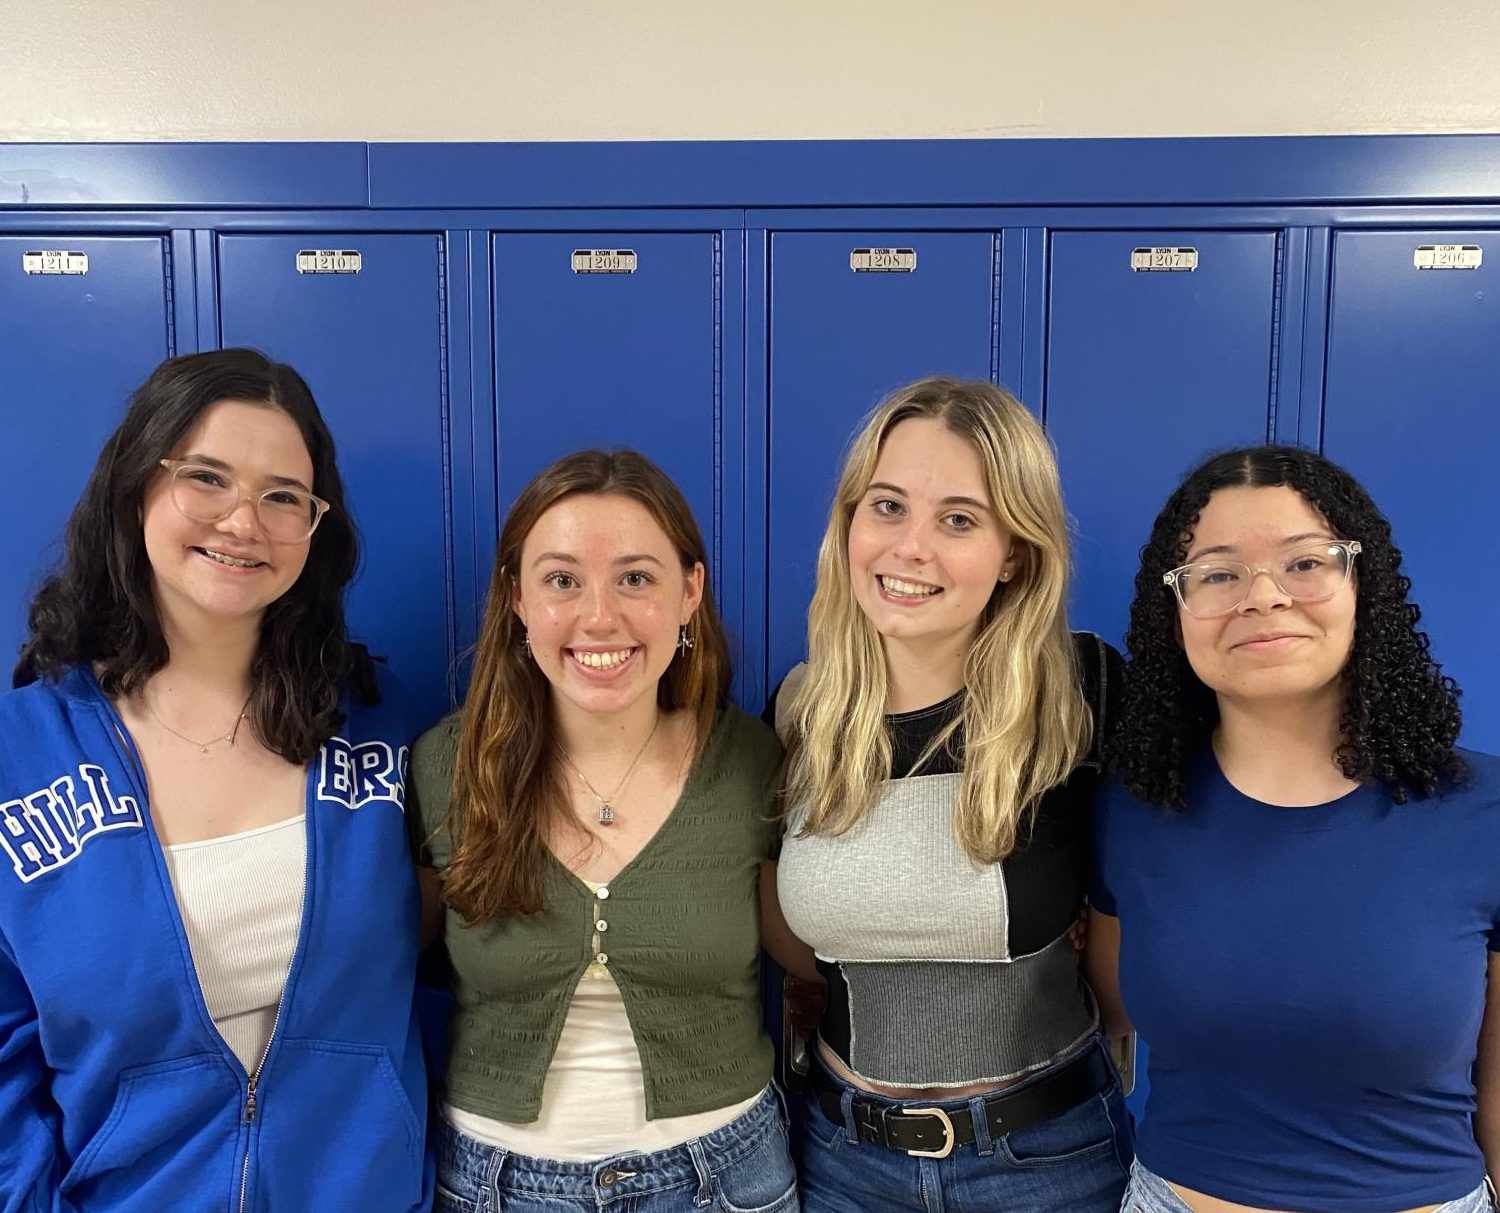 Congratulations to the 2024-2025 editors of The Hiller Newspaper: Leah Kubacka (Editor-in-Chief and News Editor), Katherine Drezewski (A&E and Media Editor), Cameron Street (Copy and Feature Editor), and Cadi Wright (Assistant Editor-in-Chief and Sports Editor).